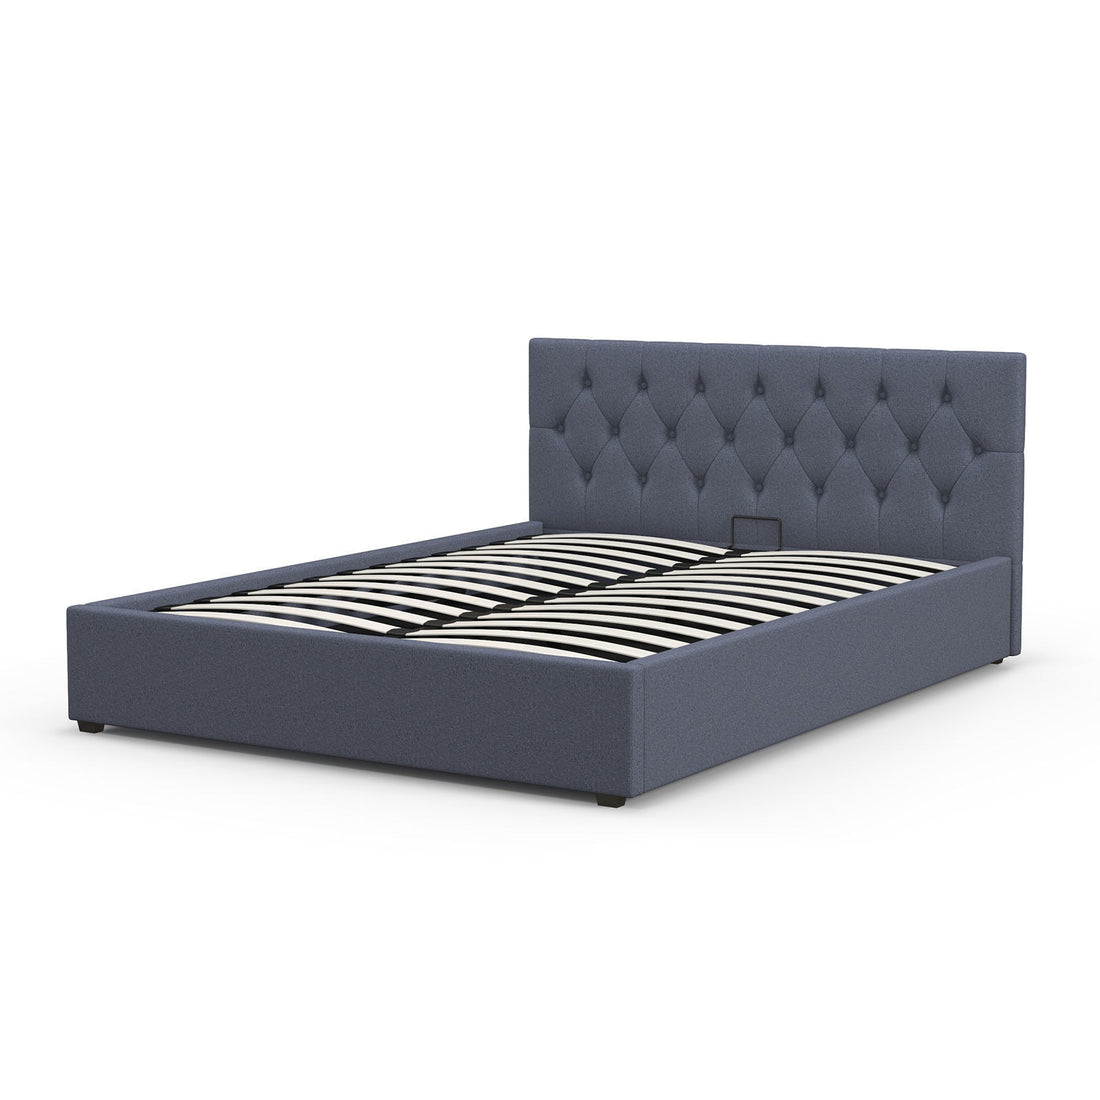 Milano Capri Luxury Gas Lift Bed Frame Base And Headboard With Storage-Bed Frames &amp; Bases-PEROZ Accessories